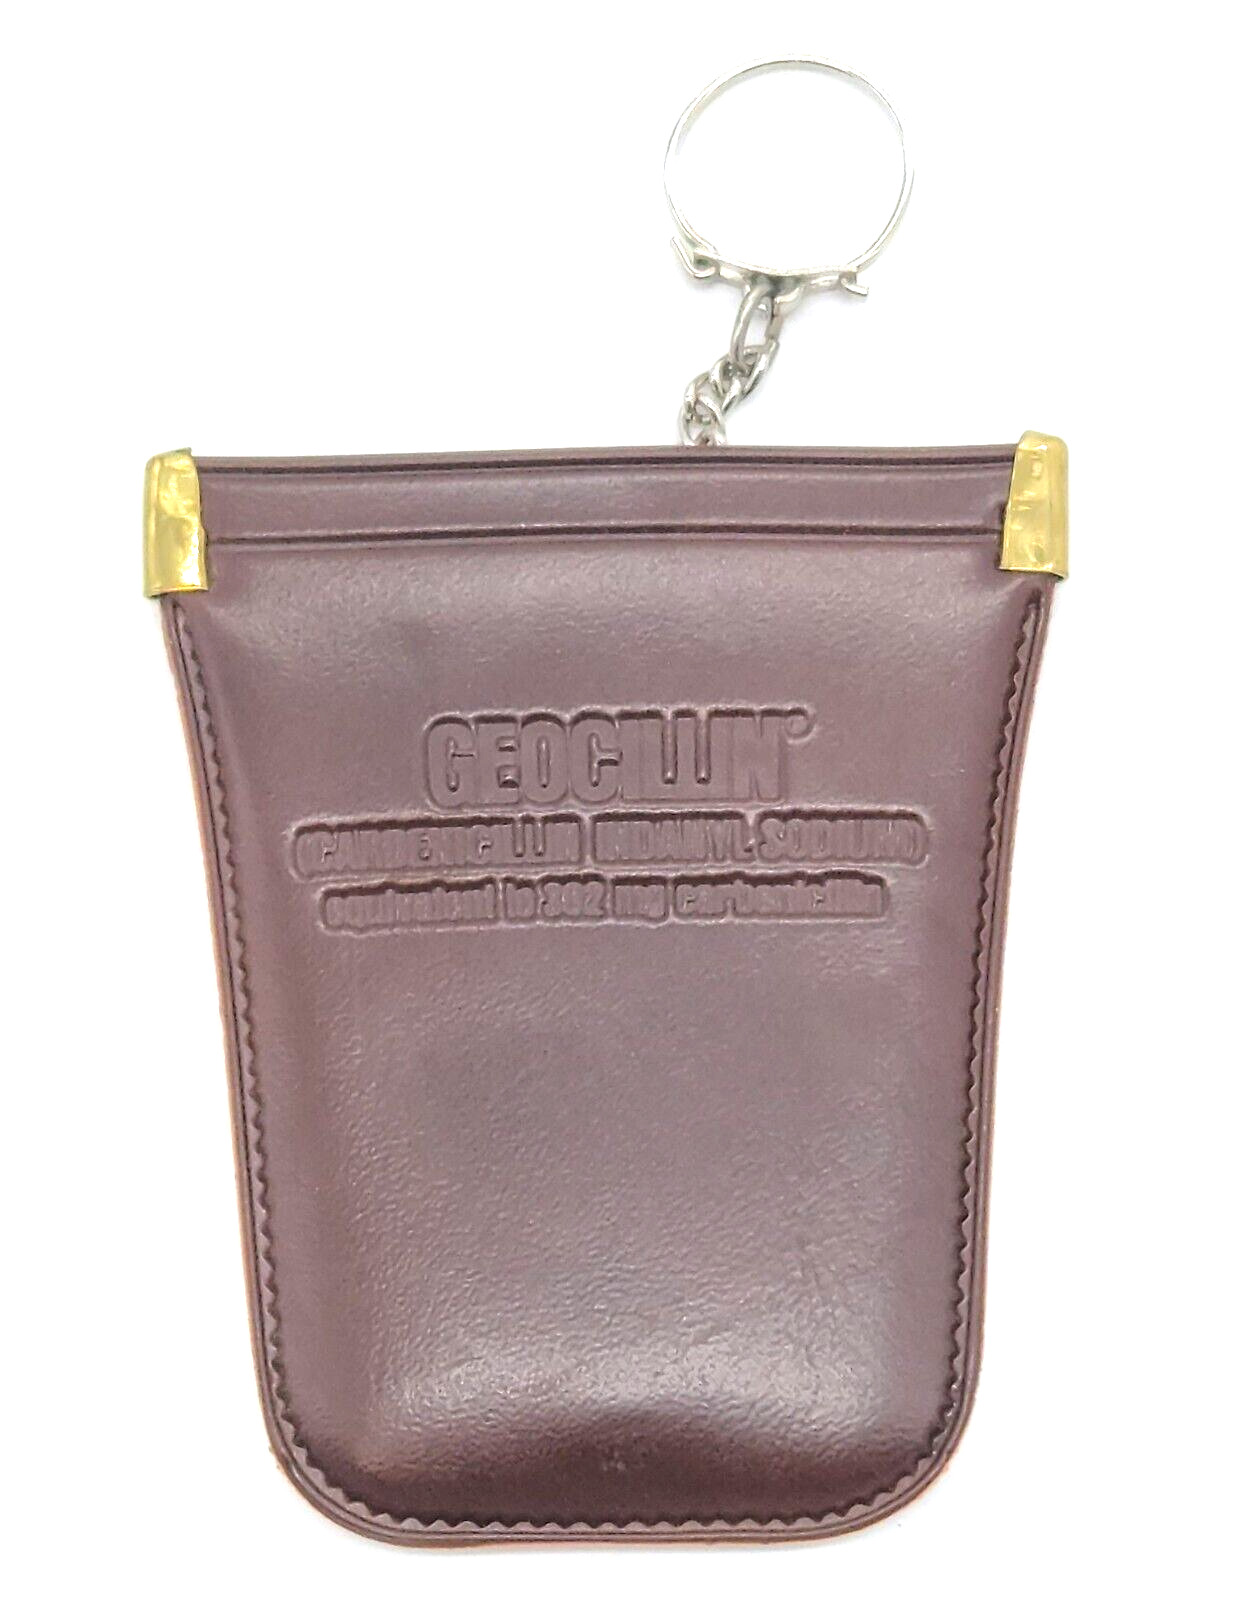 Brown Coin Purse Key Chain Pfizer GEOCILLIN Ad Advertisement  Faux Leather 